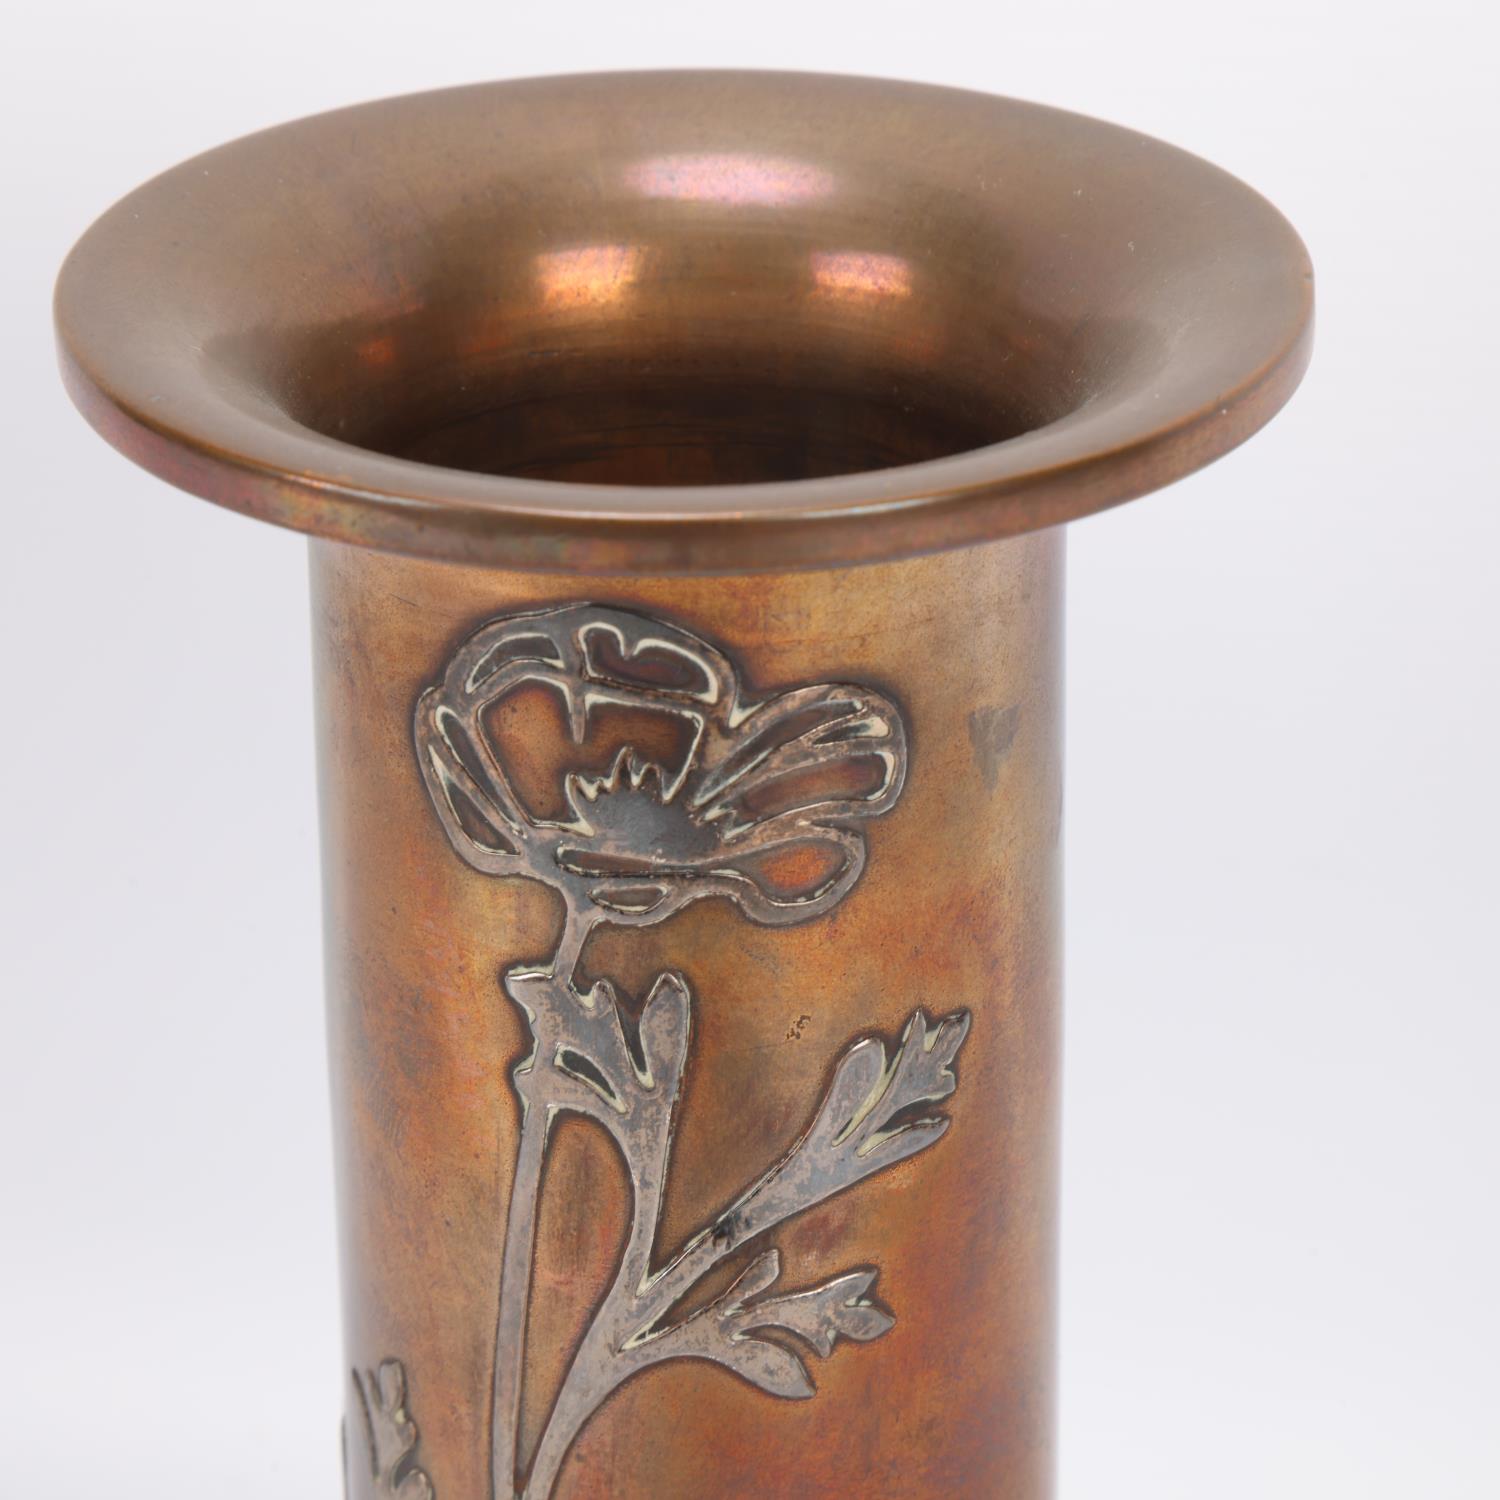 Otto Heintz, American Arts and Crafts vase, sterling silver on bronze for Heintz Art Metal Shop, - Image 2 of 3